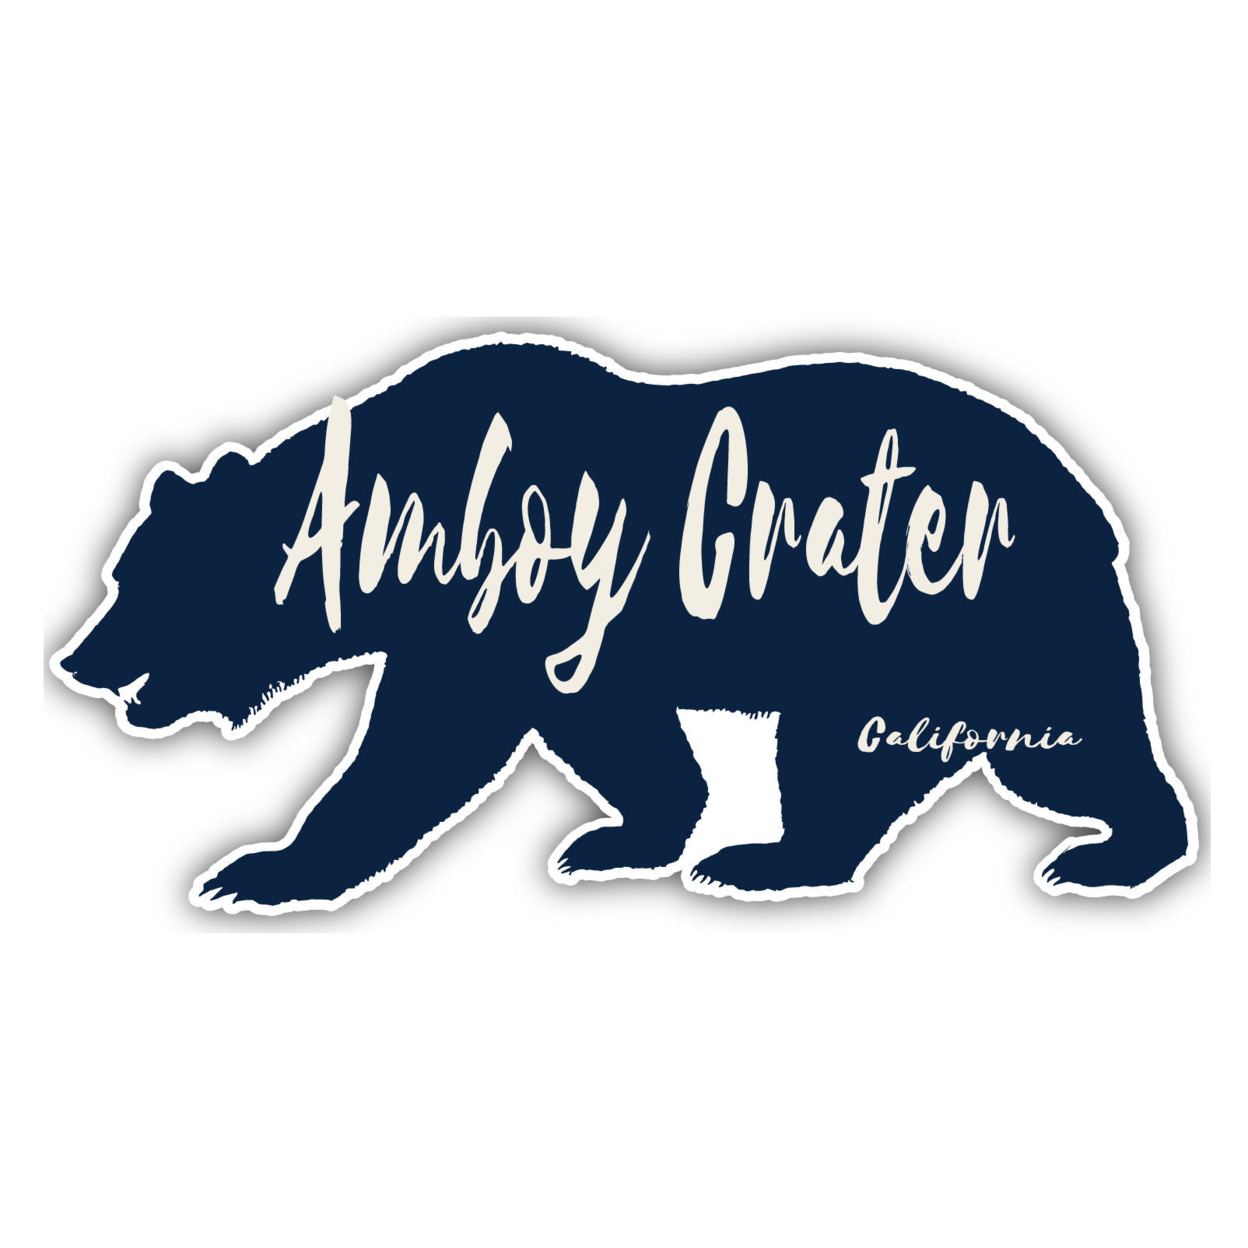 Amboy Crater California Souvenir Decorative Stickers (Choose Theme And Size) - 4-Pack, 4-Inch, Bear